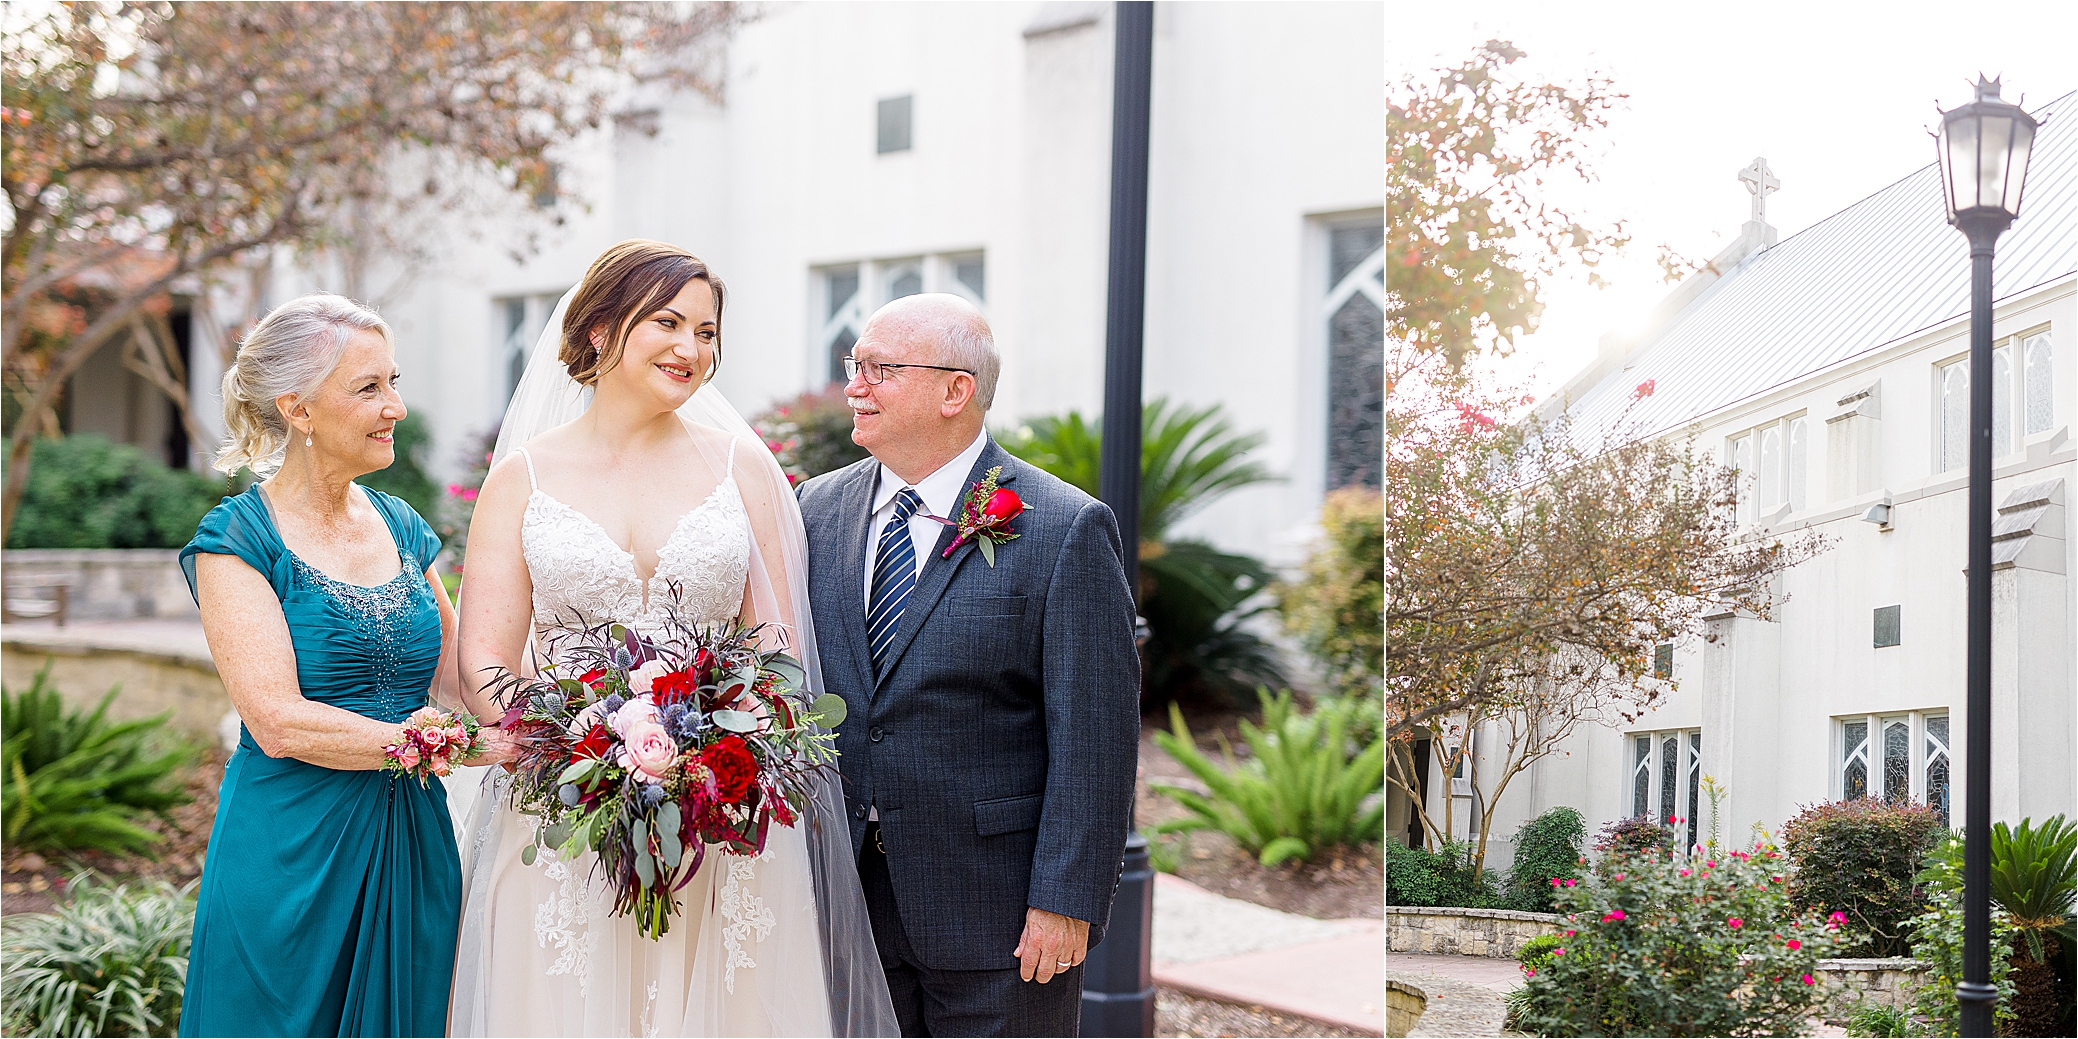 A bride shares a smile with her dad as she poses with both of her parents before her wedding at Alamo Heights United Methodist Church in San Antonio